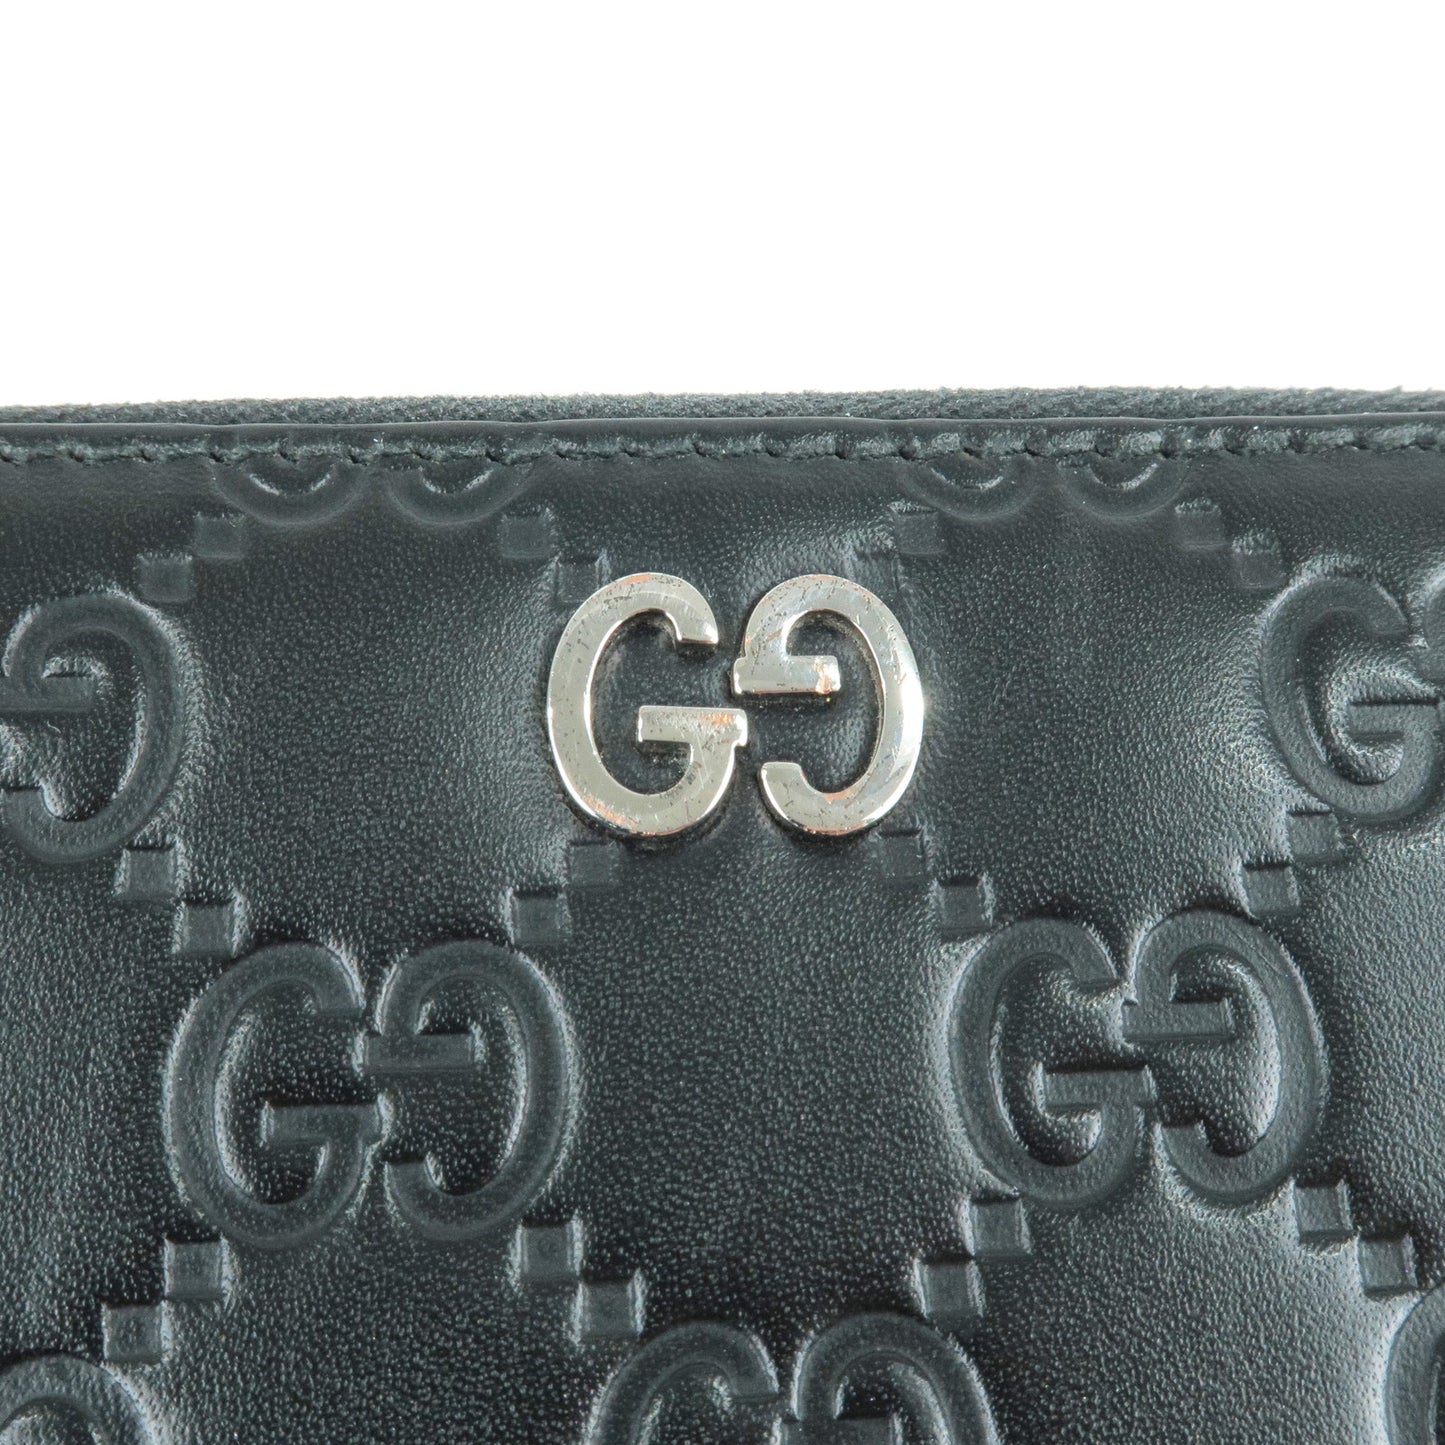 GUCCI Guccissima Leather Round Zippy Long Wallet Black 473928